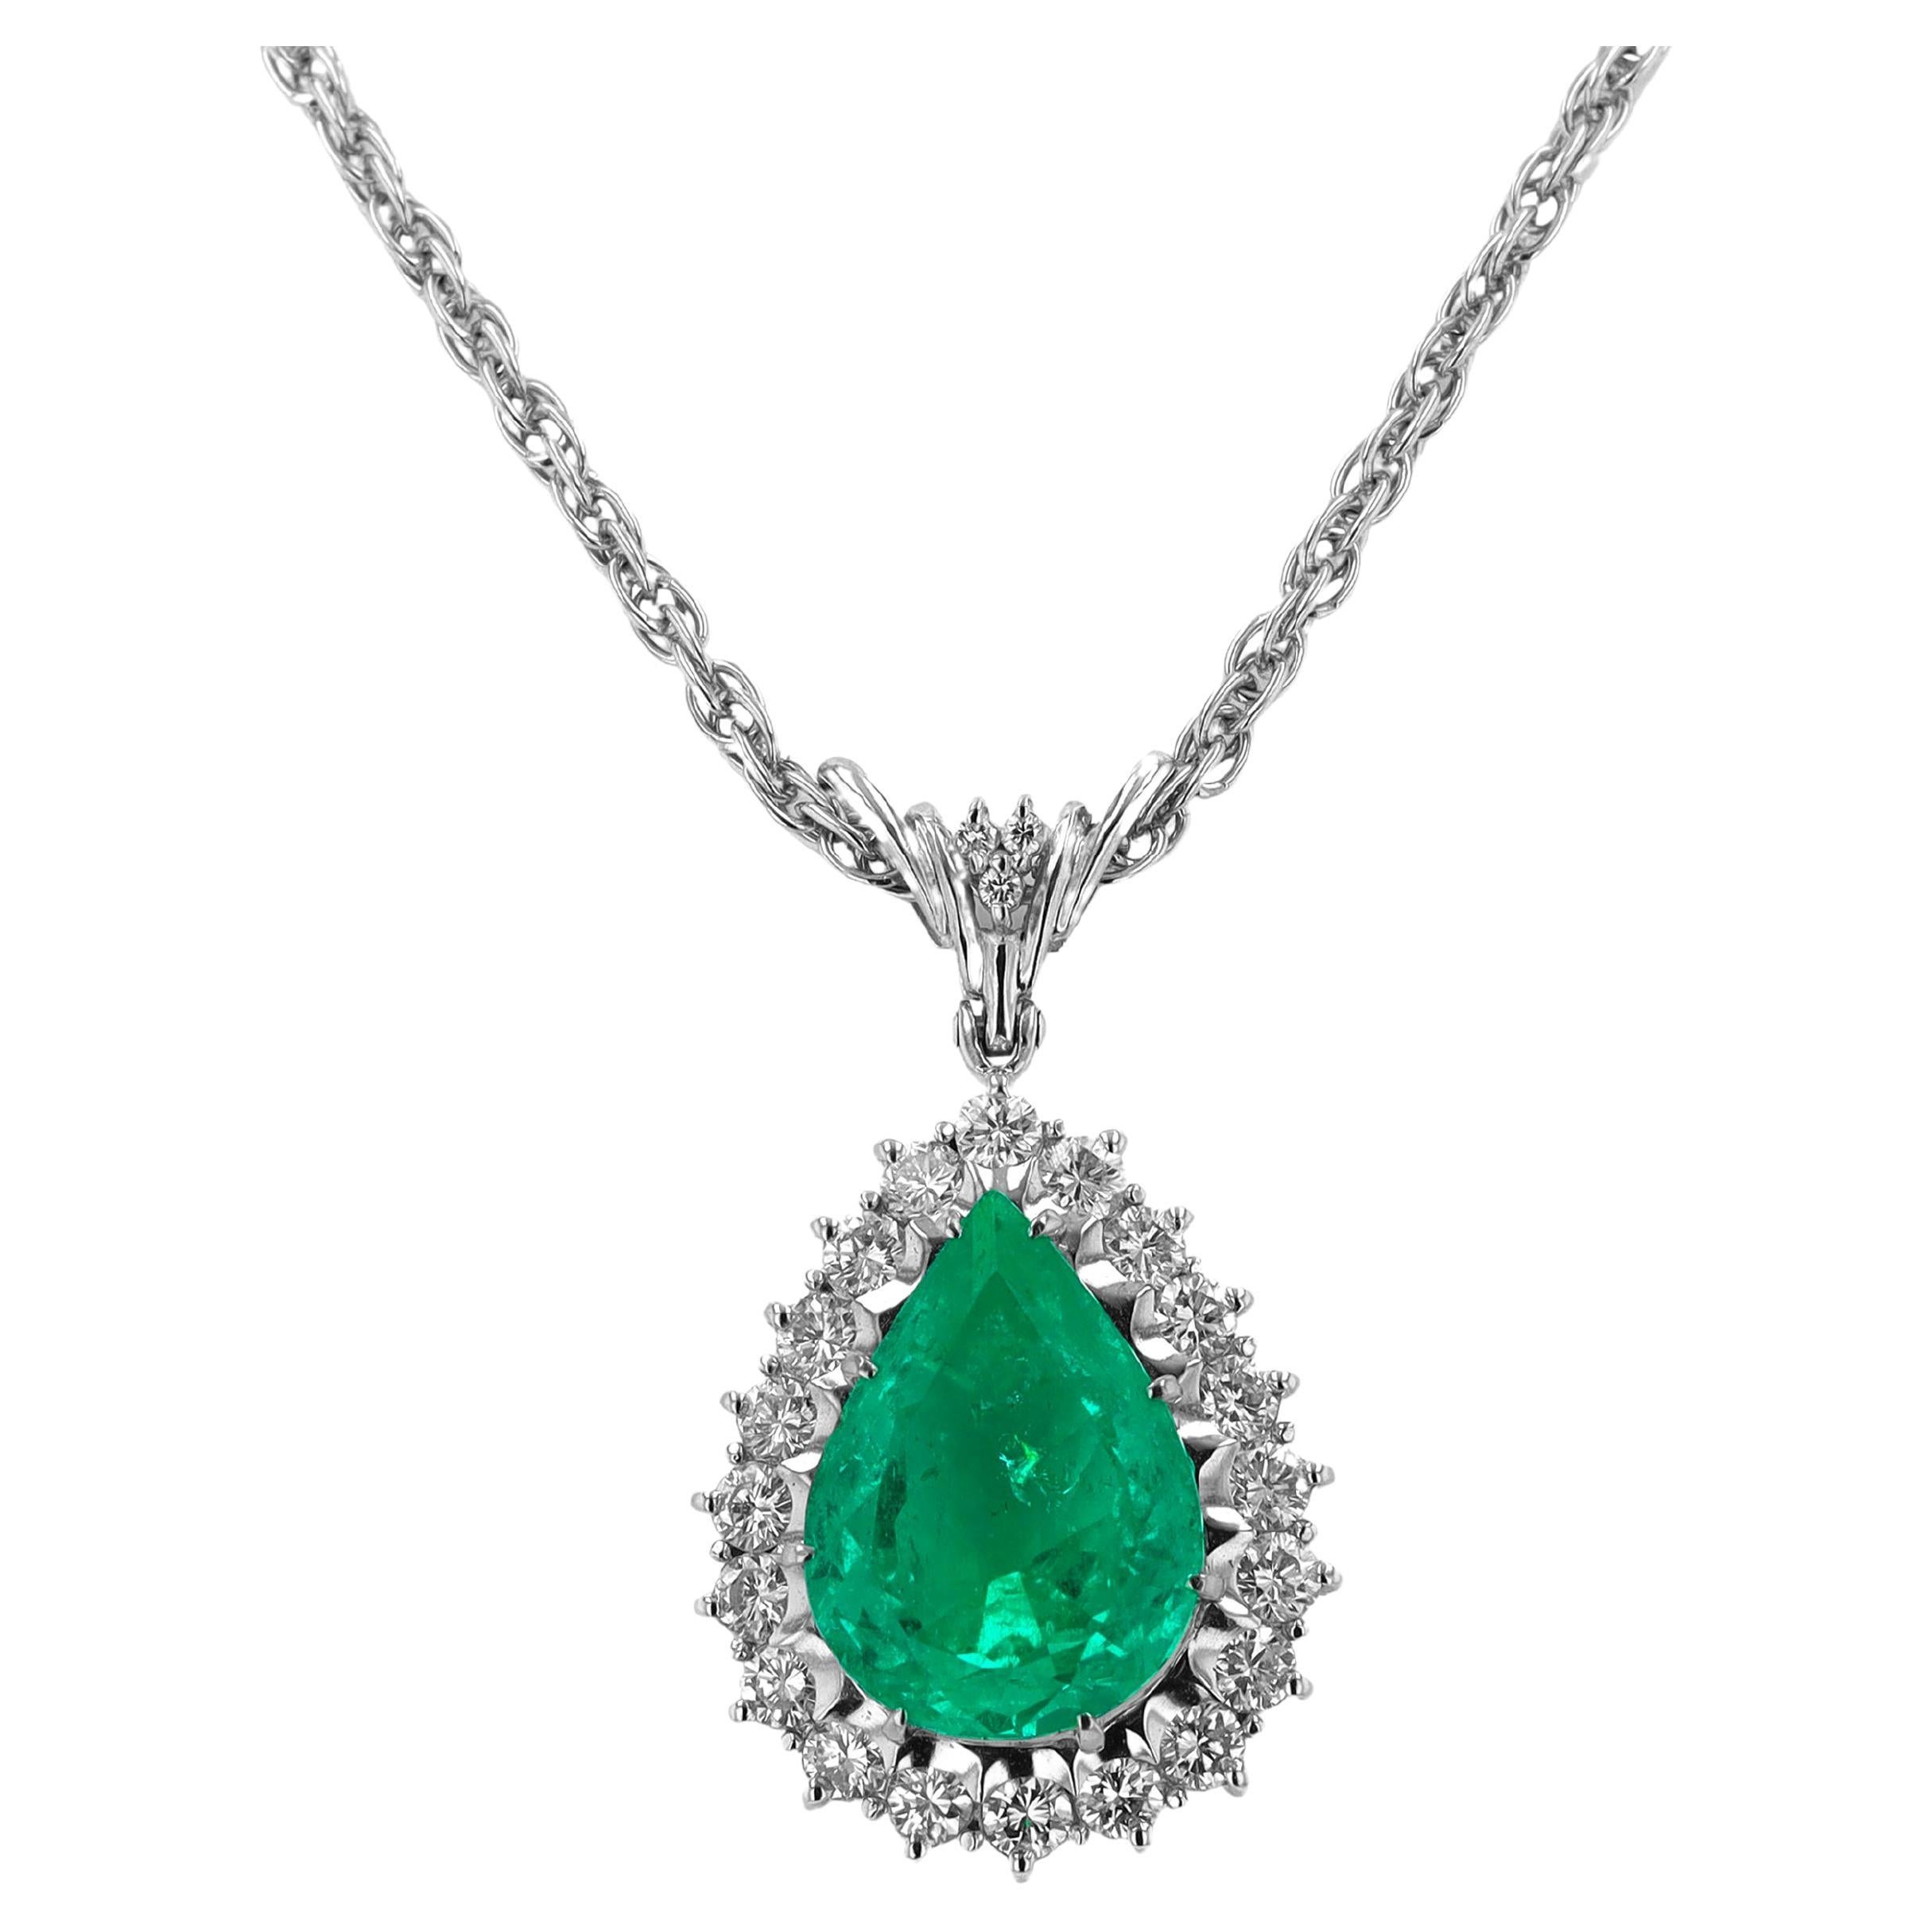 GIA Certified 10 Carat Colombian Emerald Necklace